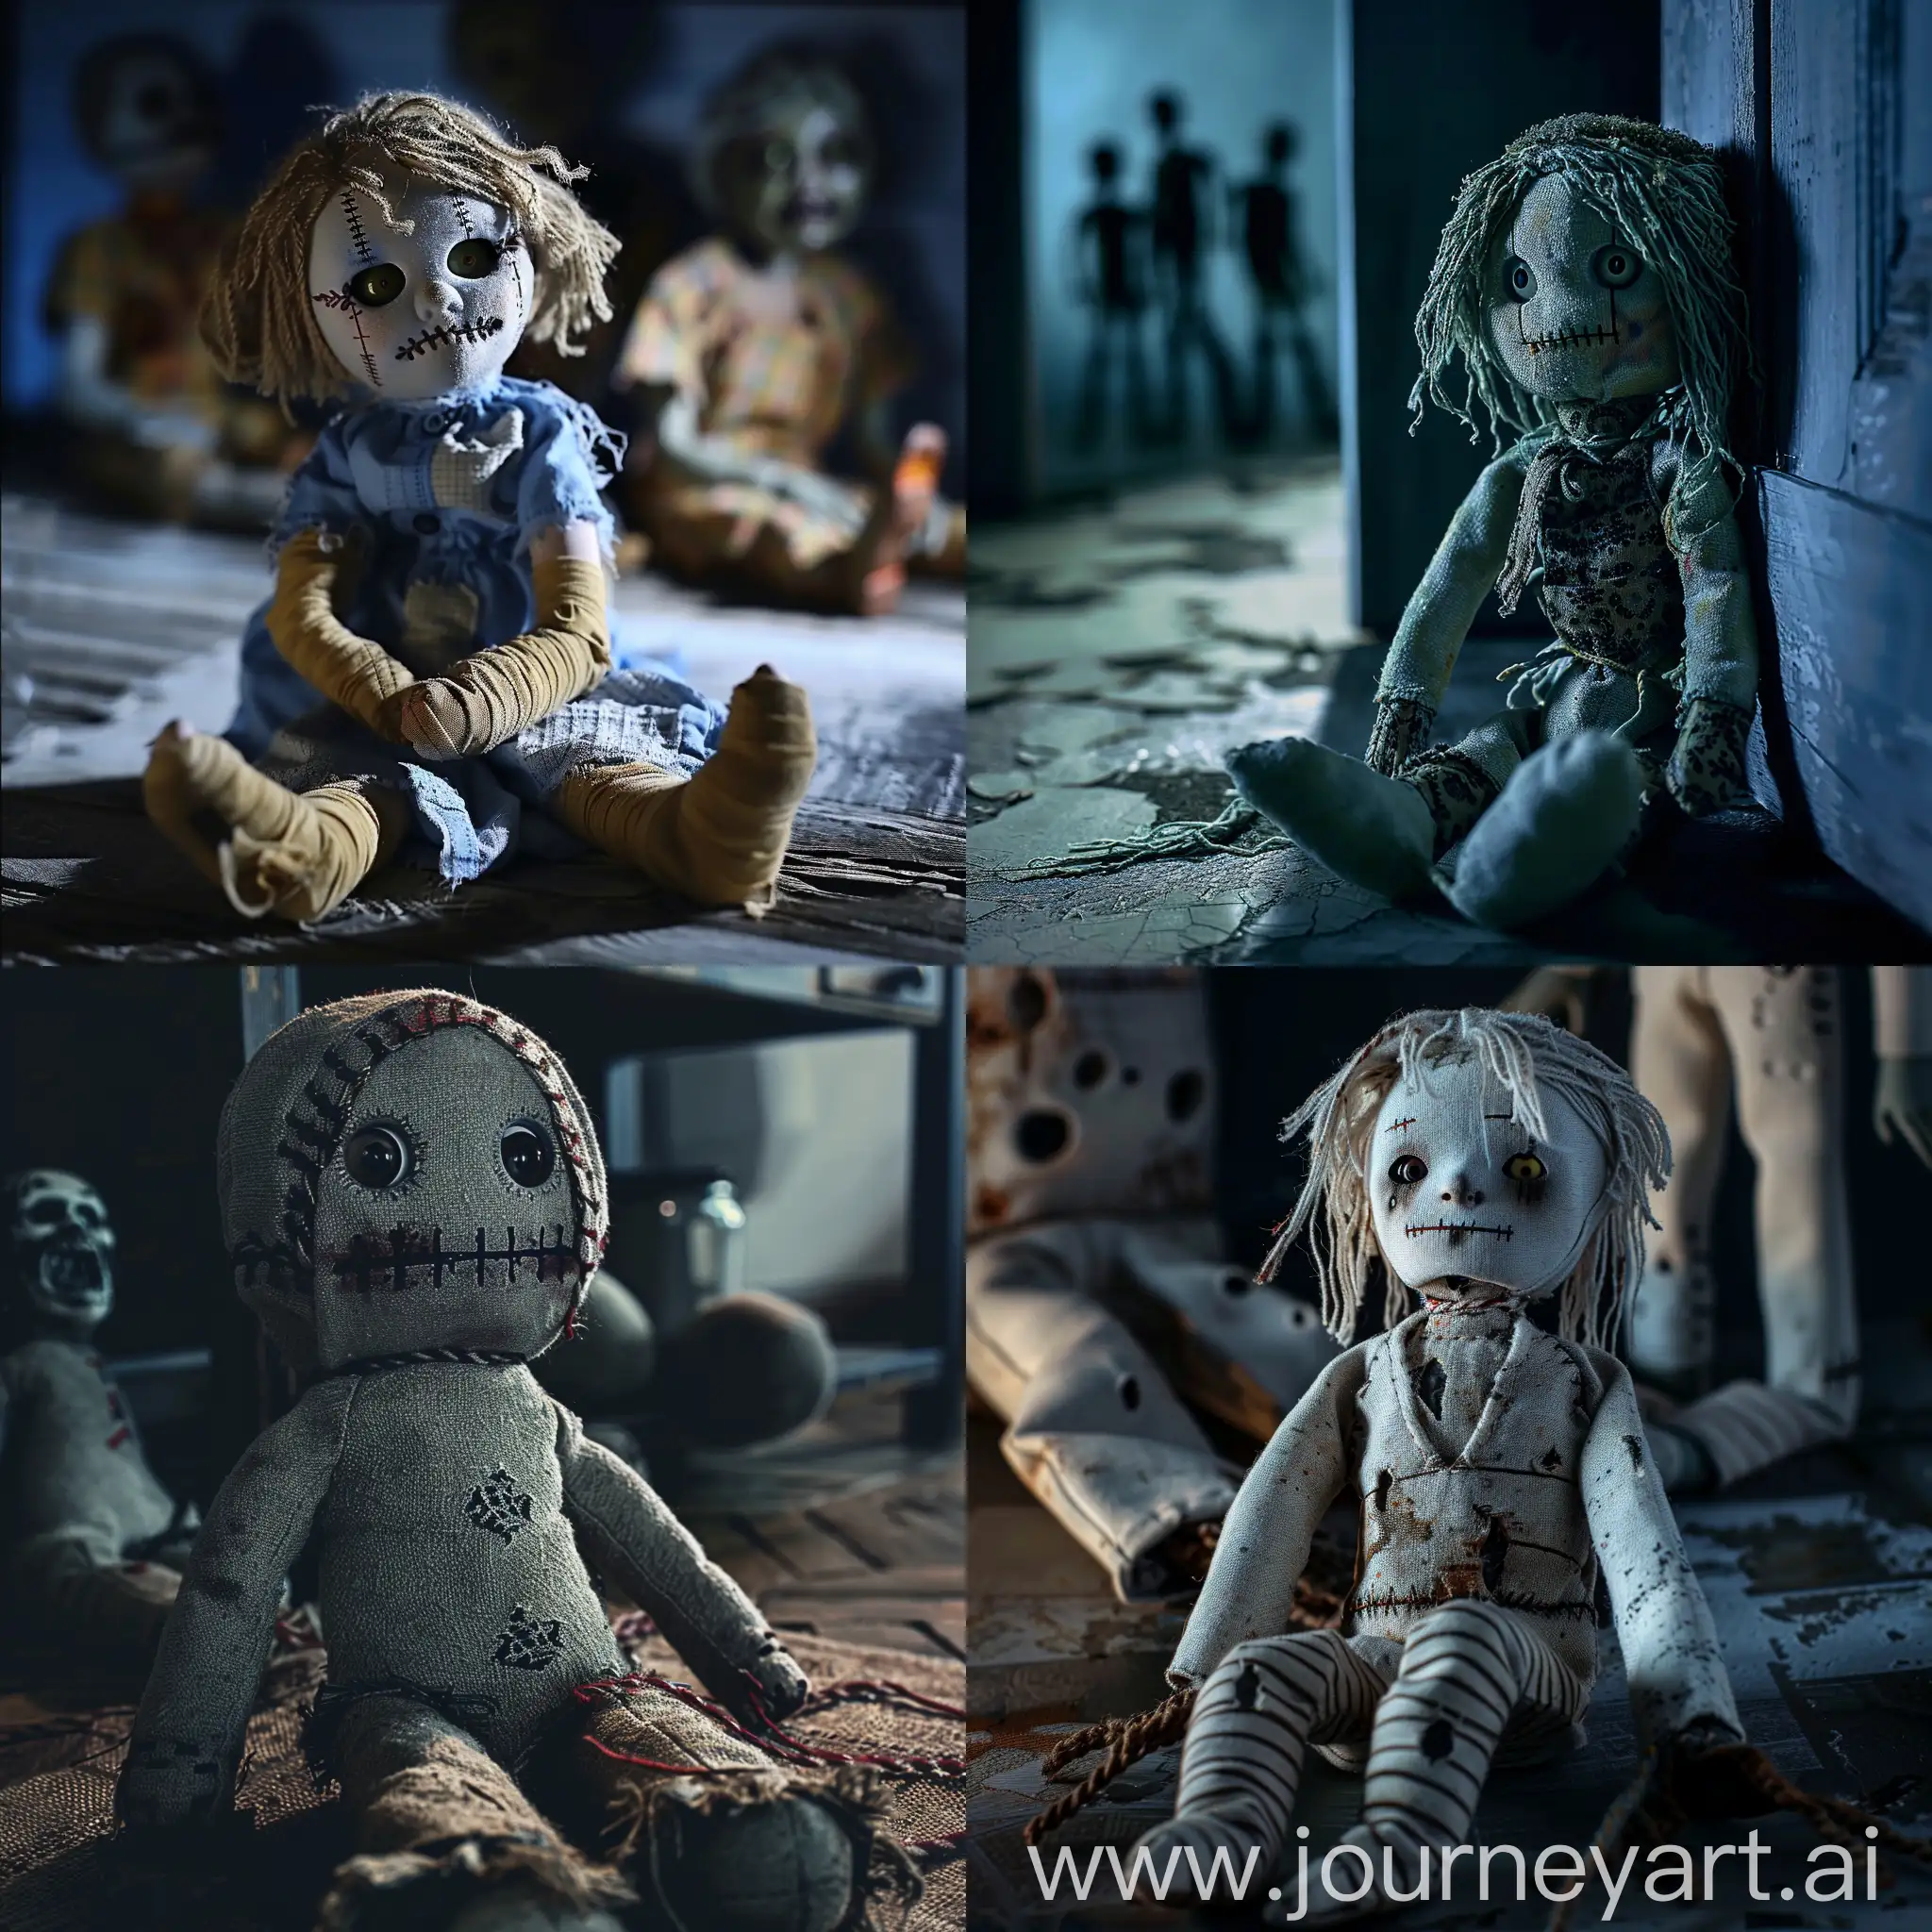 Psychopath rag doll is sitting in a dark room, scary zombie spirits are watching it horror theme